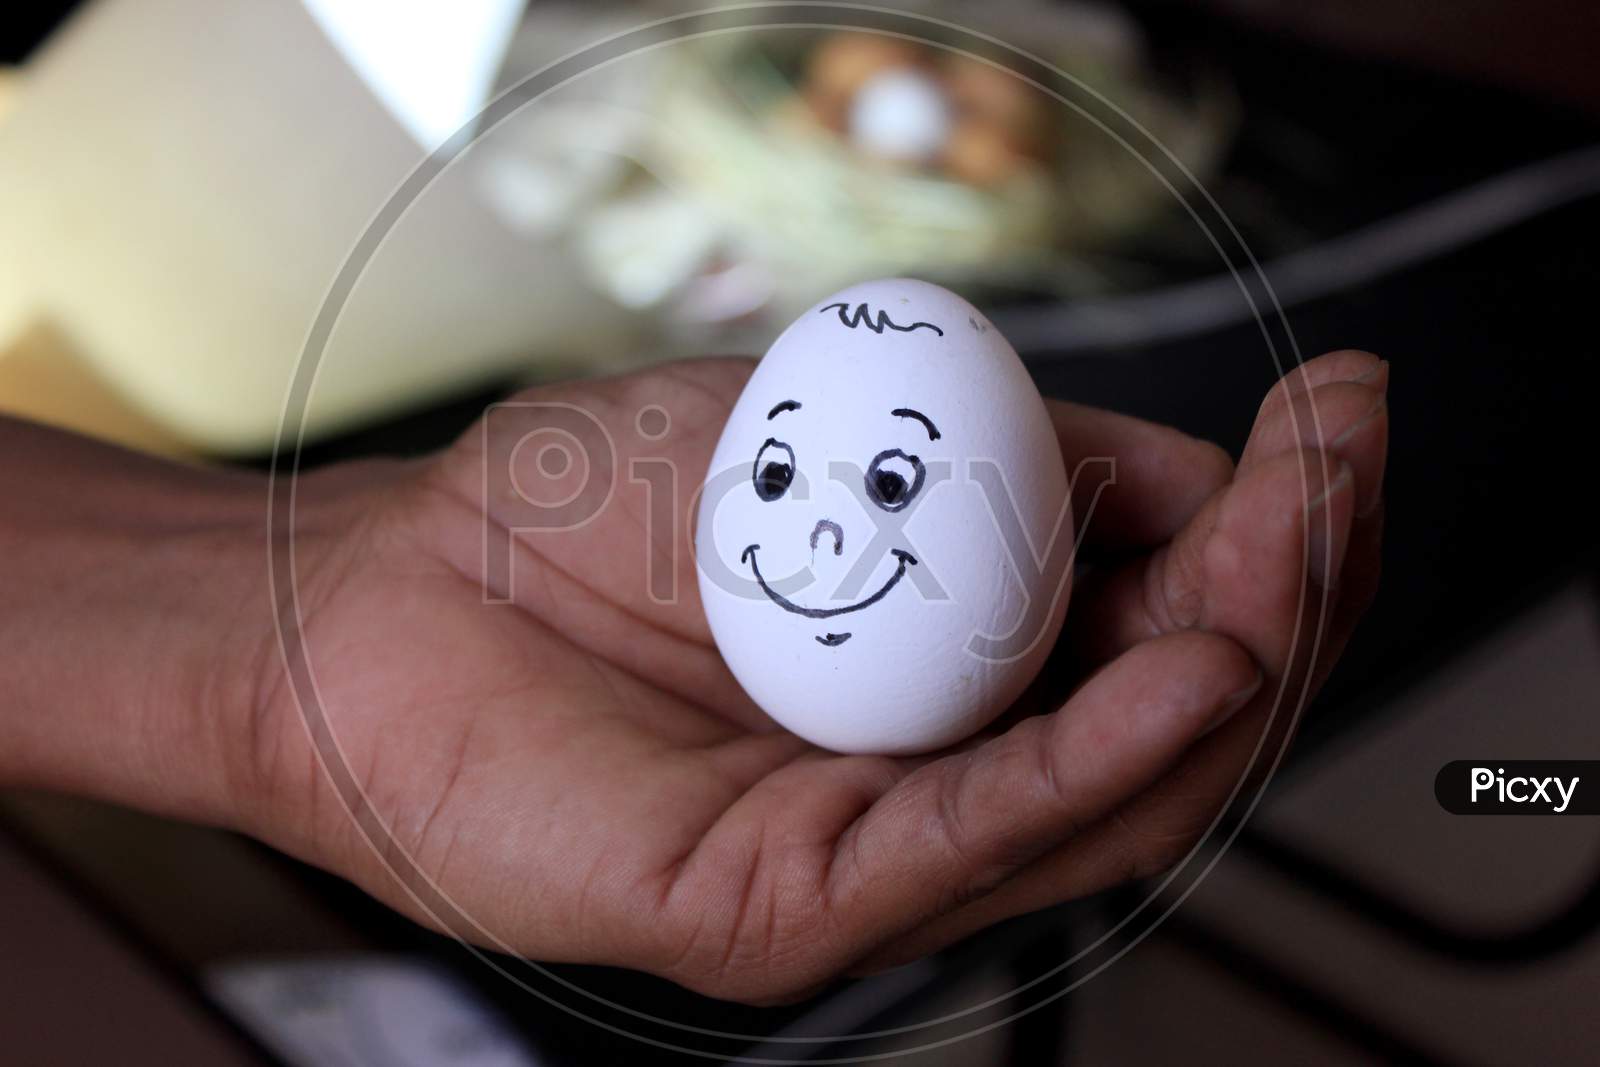 Smiling Egg On Top Of The Palm